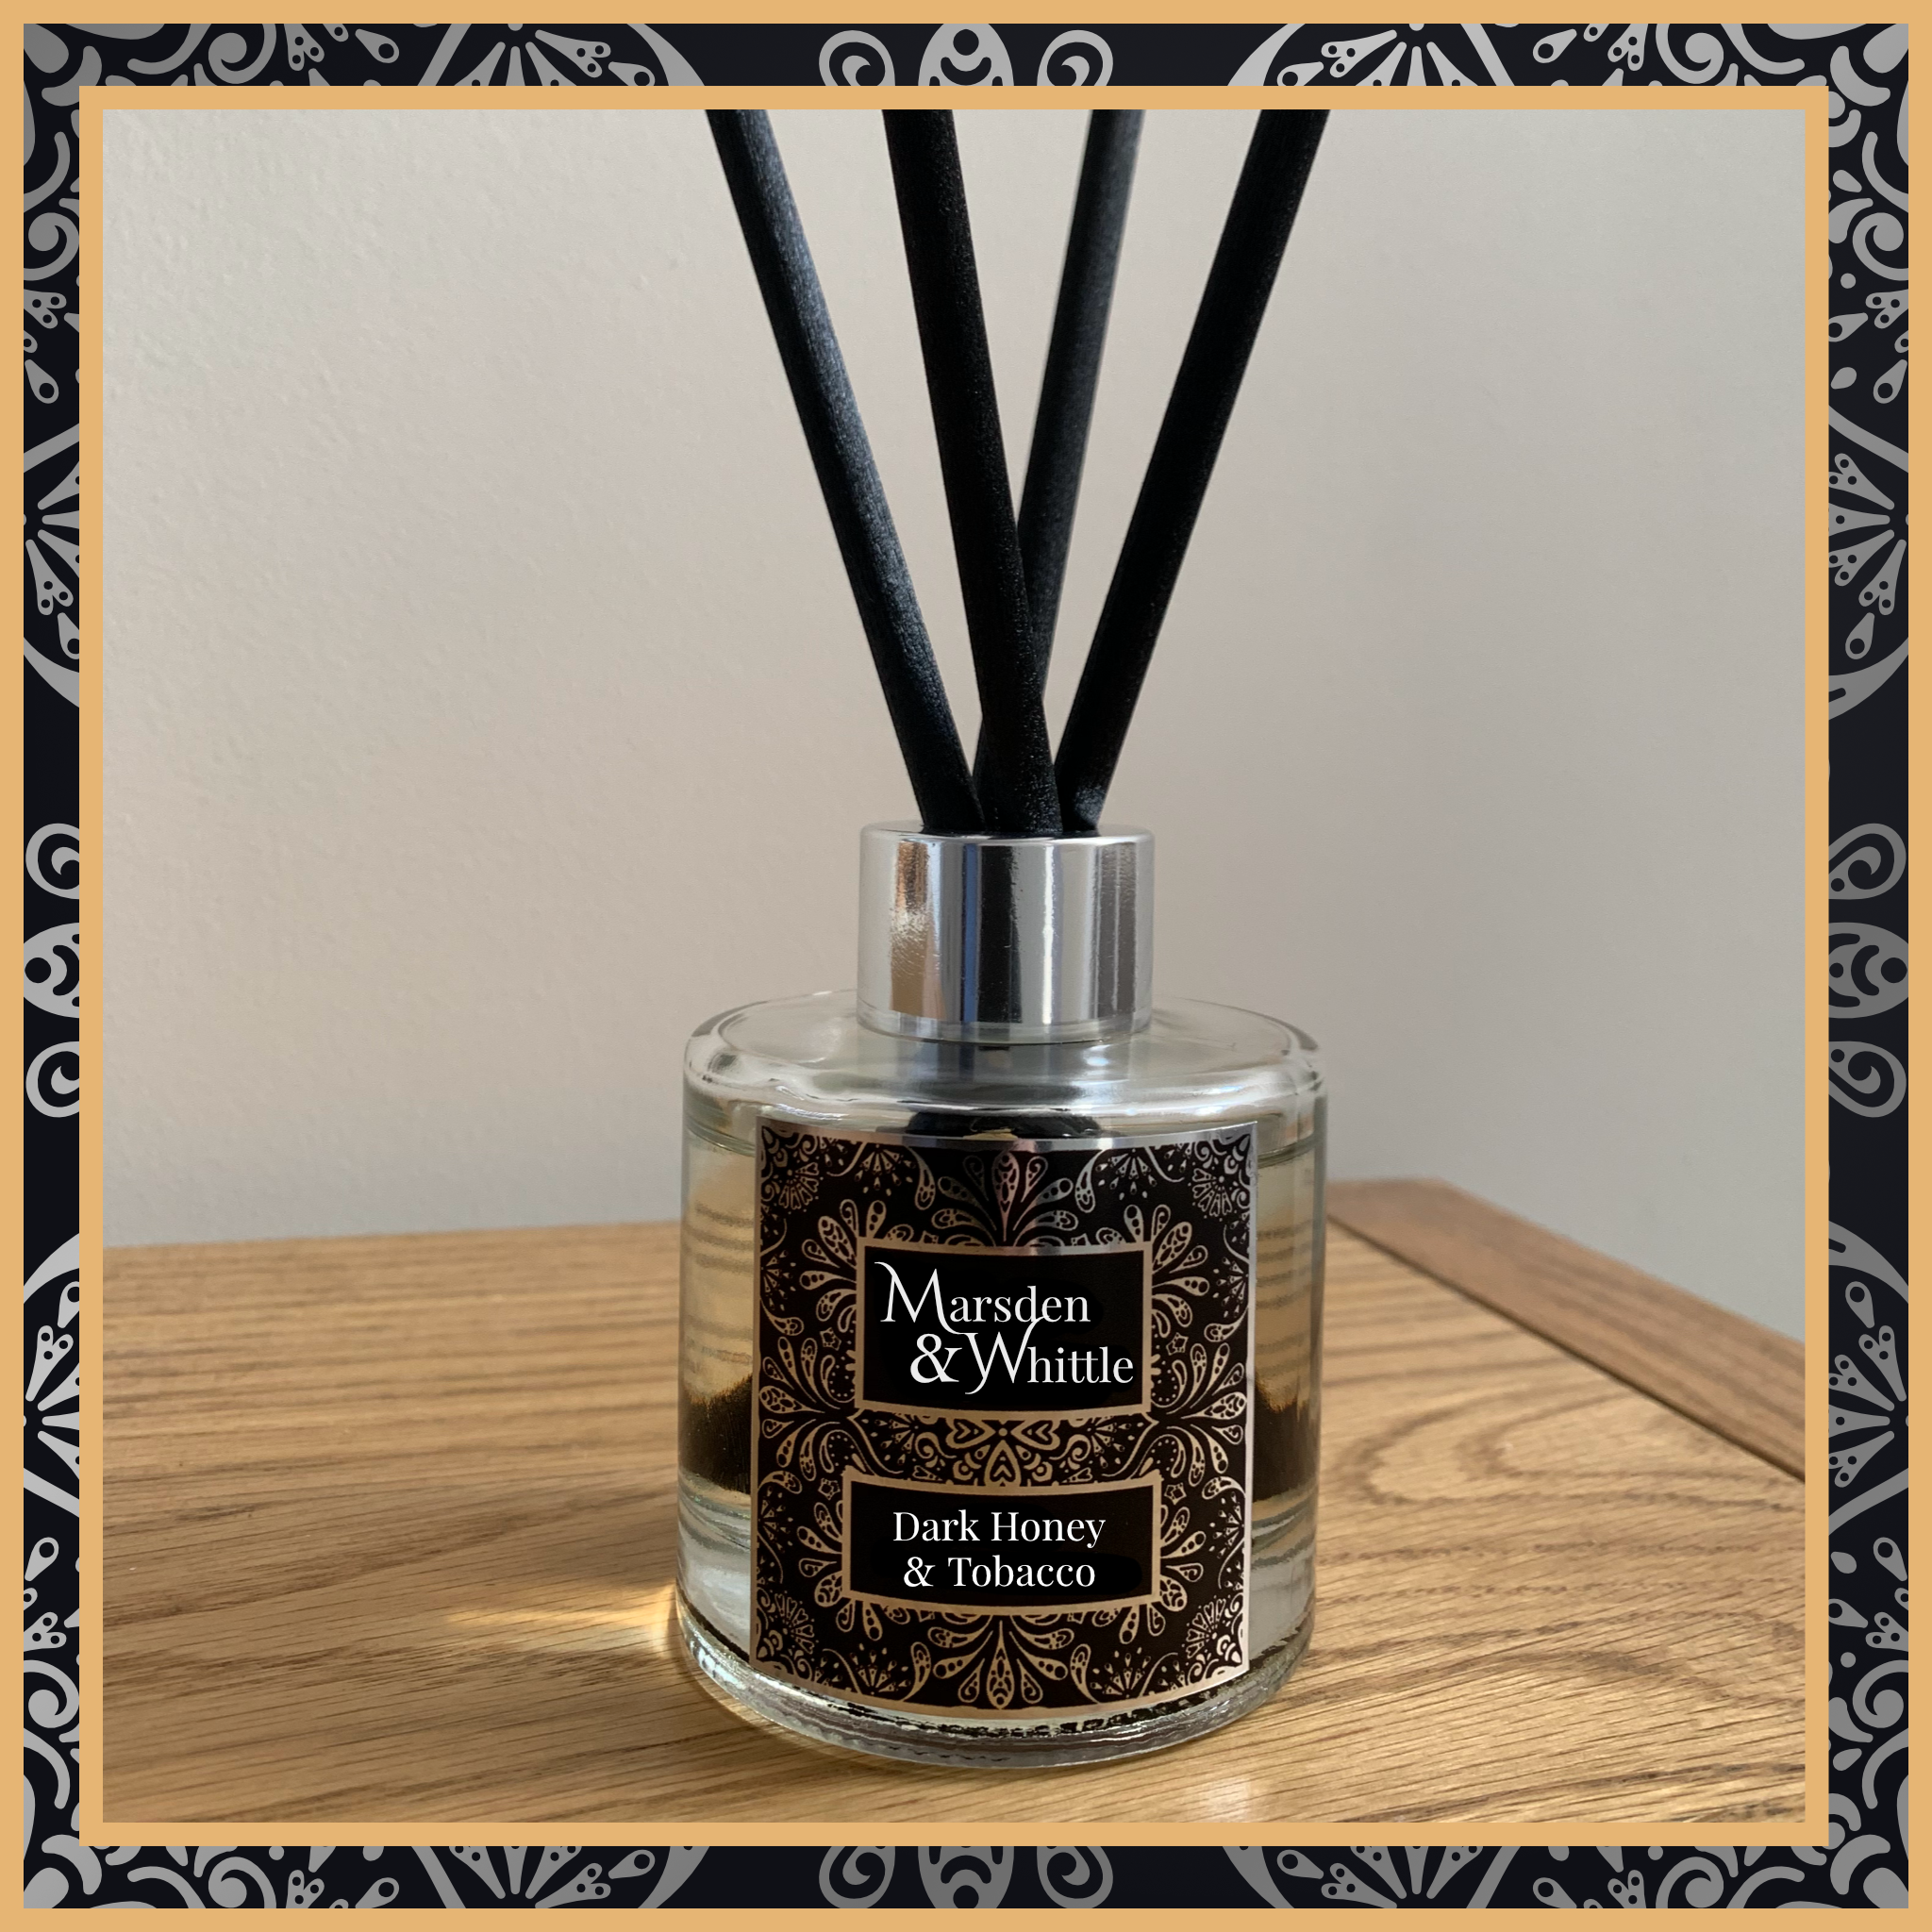 A Dark Honey & Tobacco glass reed diffuser with black reeds and a silver chrome cap sitting on a wooden table.